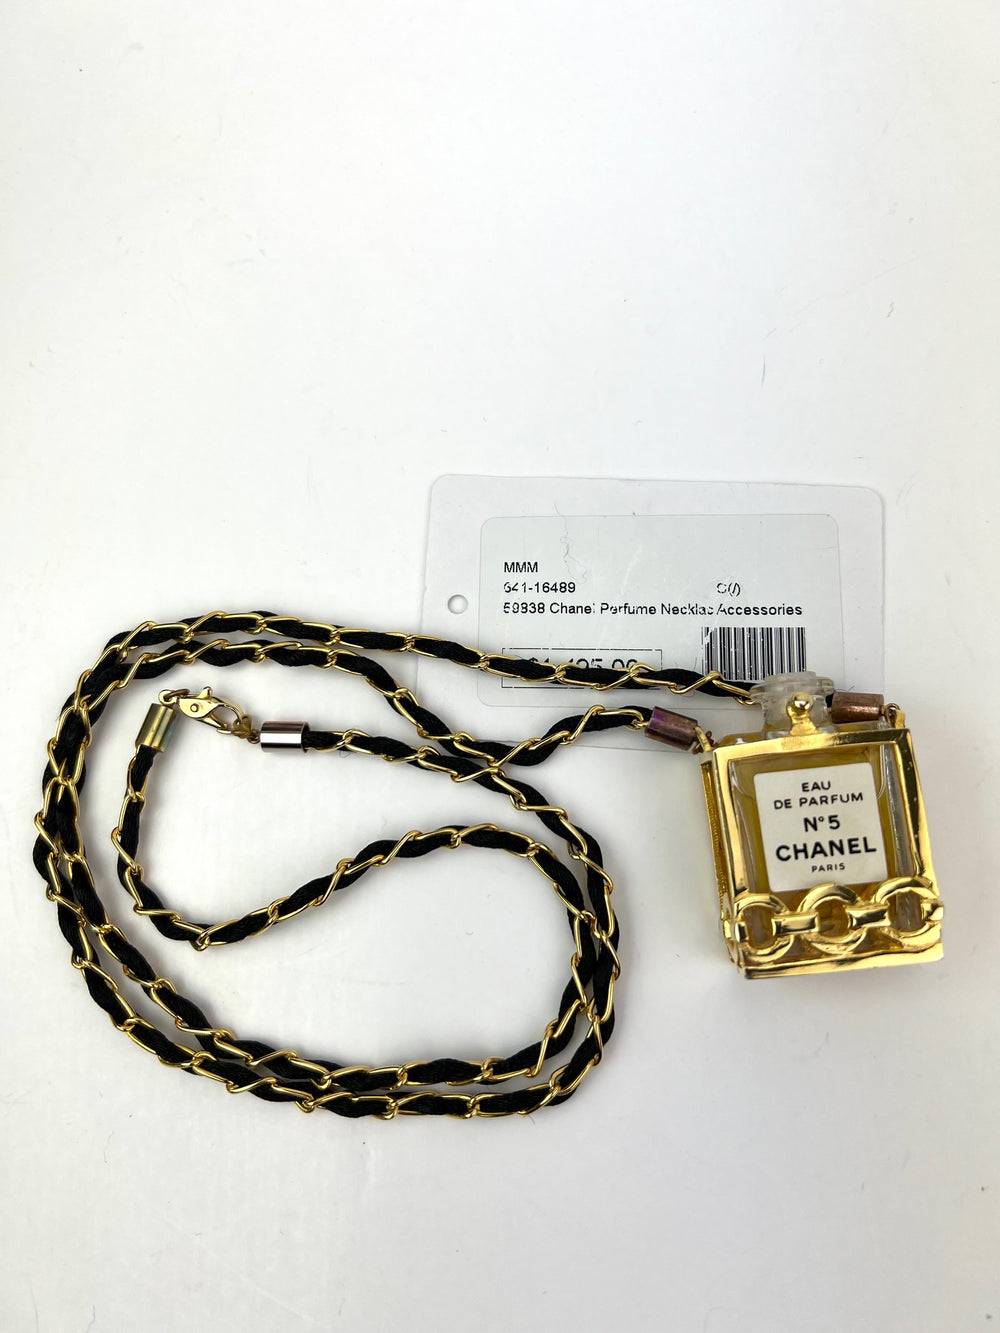 CHANEL A22S CHANEL NO5 PERFUME NECKLACE 237015693 WE Luxury Accessories  on Carousell